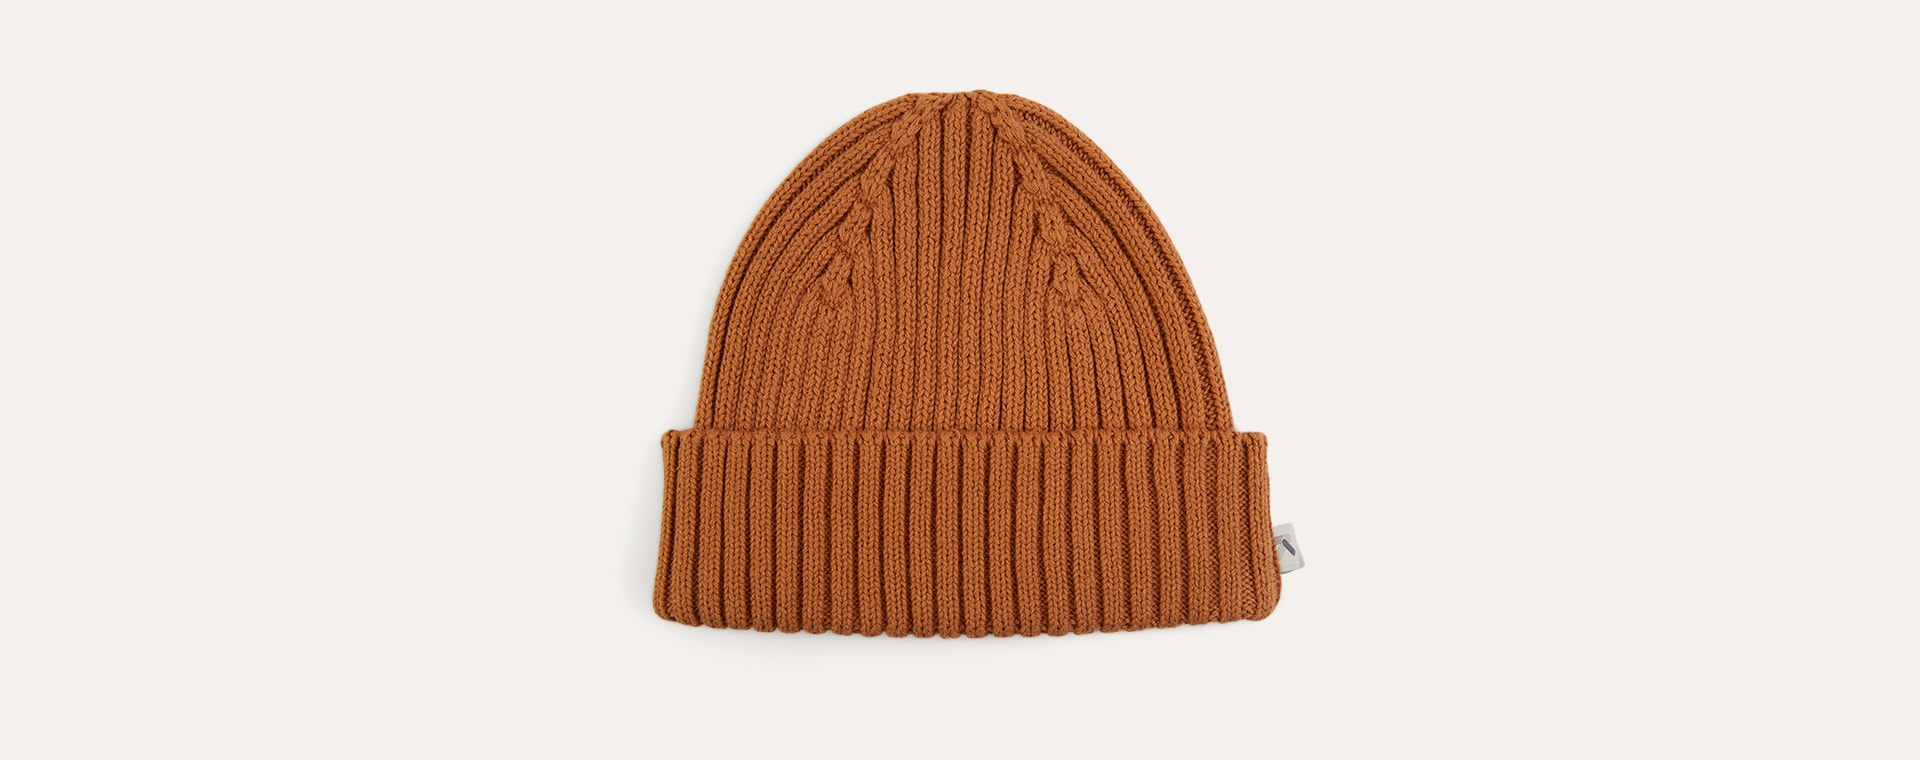 Buy the KIDLY Label Organic Cotton Beanie at KIDLY UK